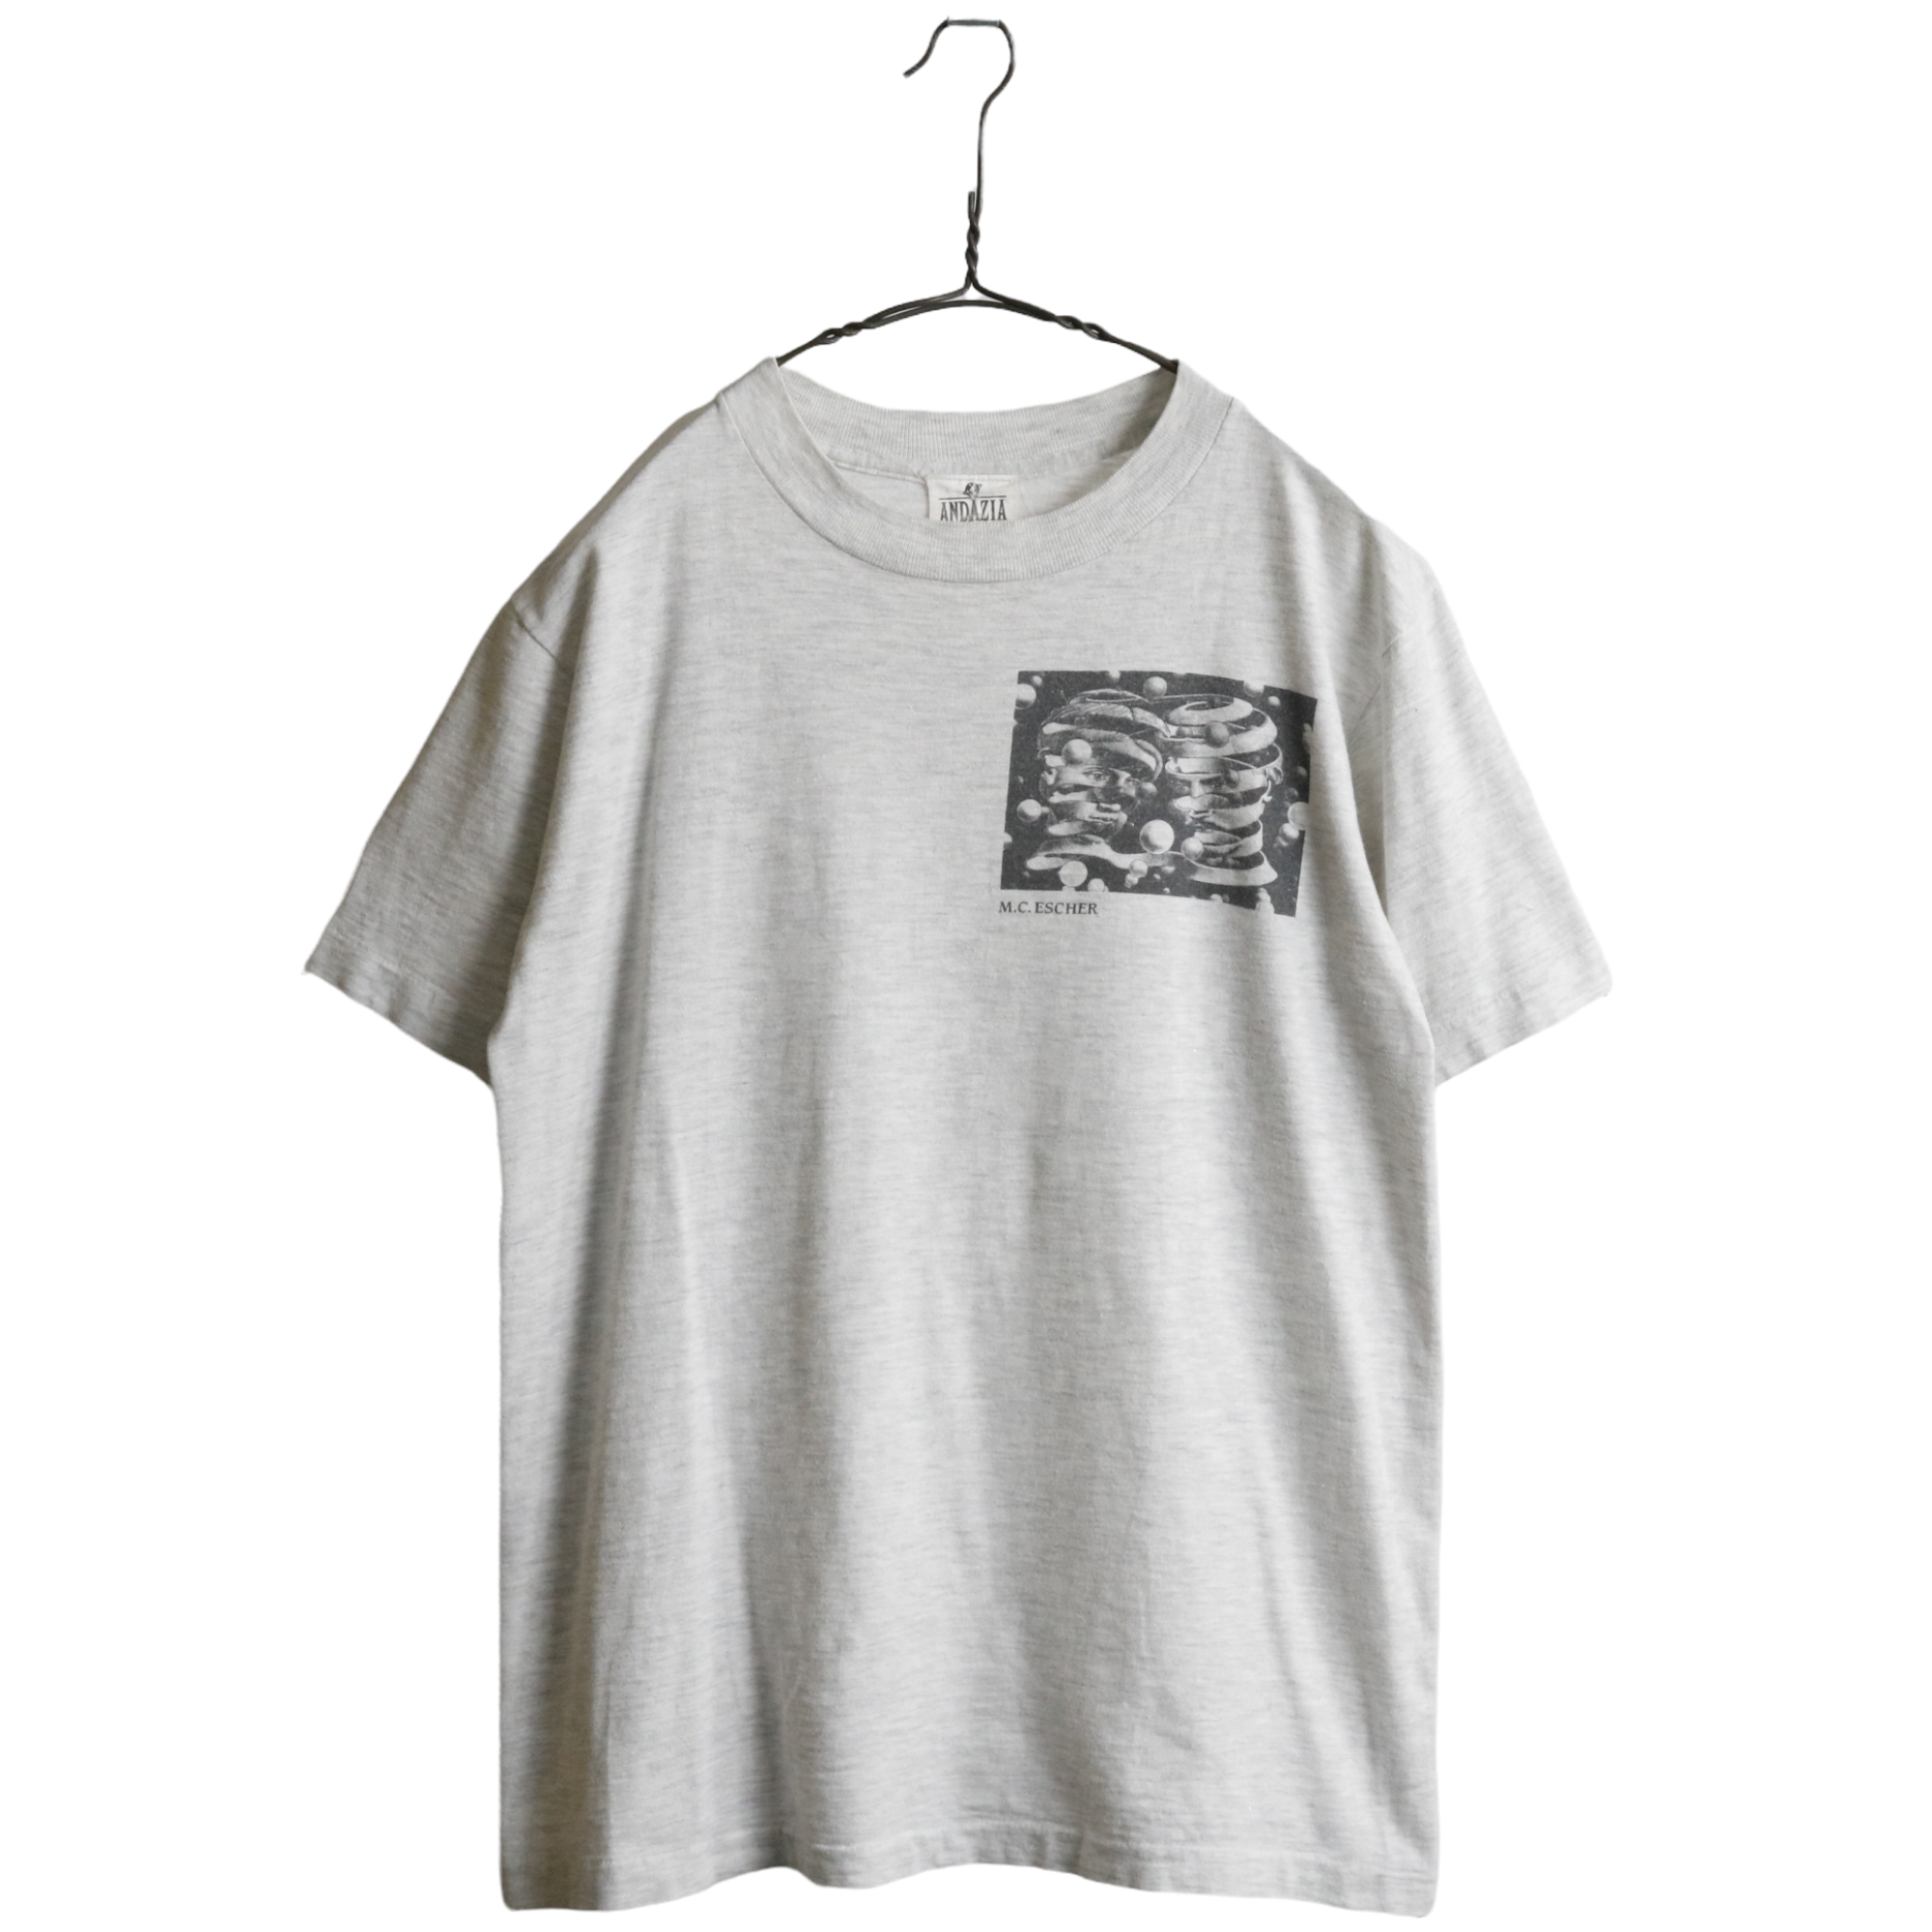 9090's ヴィンテージ エッシャー Tシャツ